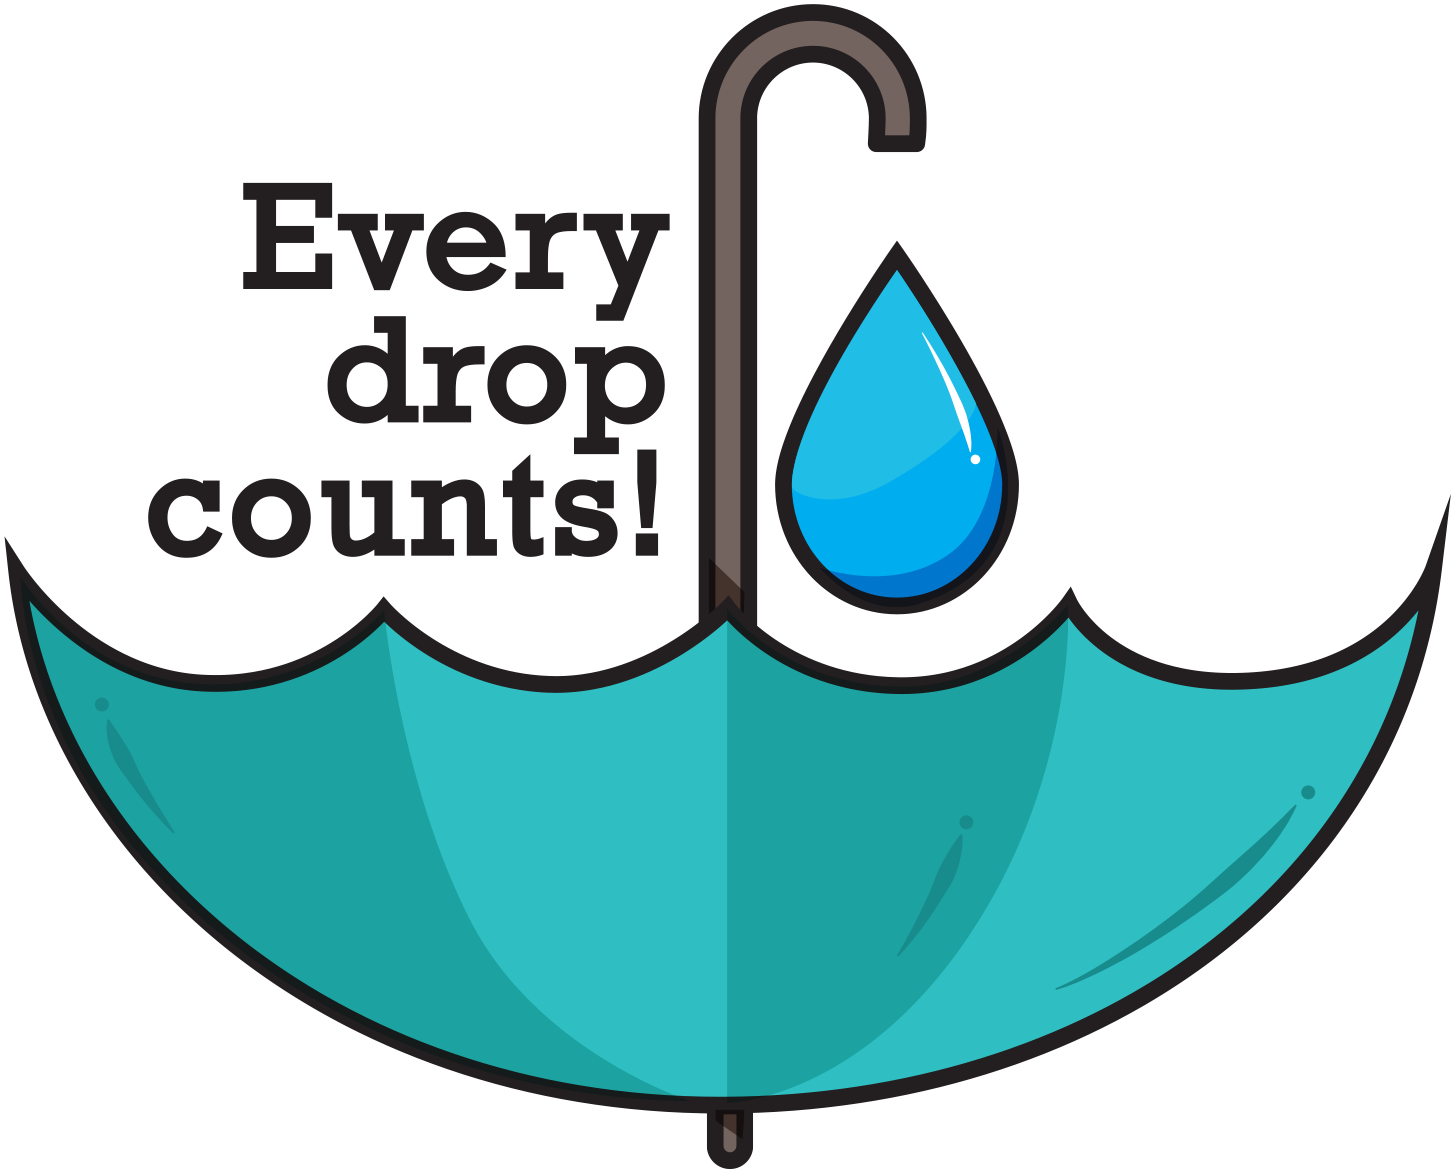 Water Conservation - Lessons - Blendspace